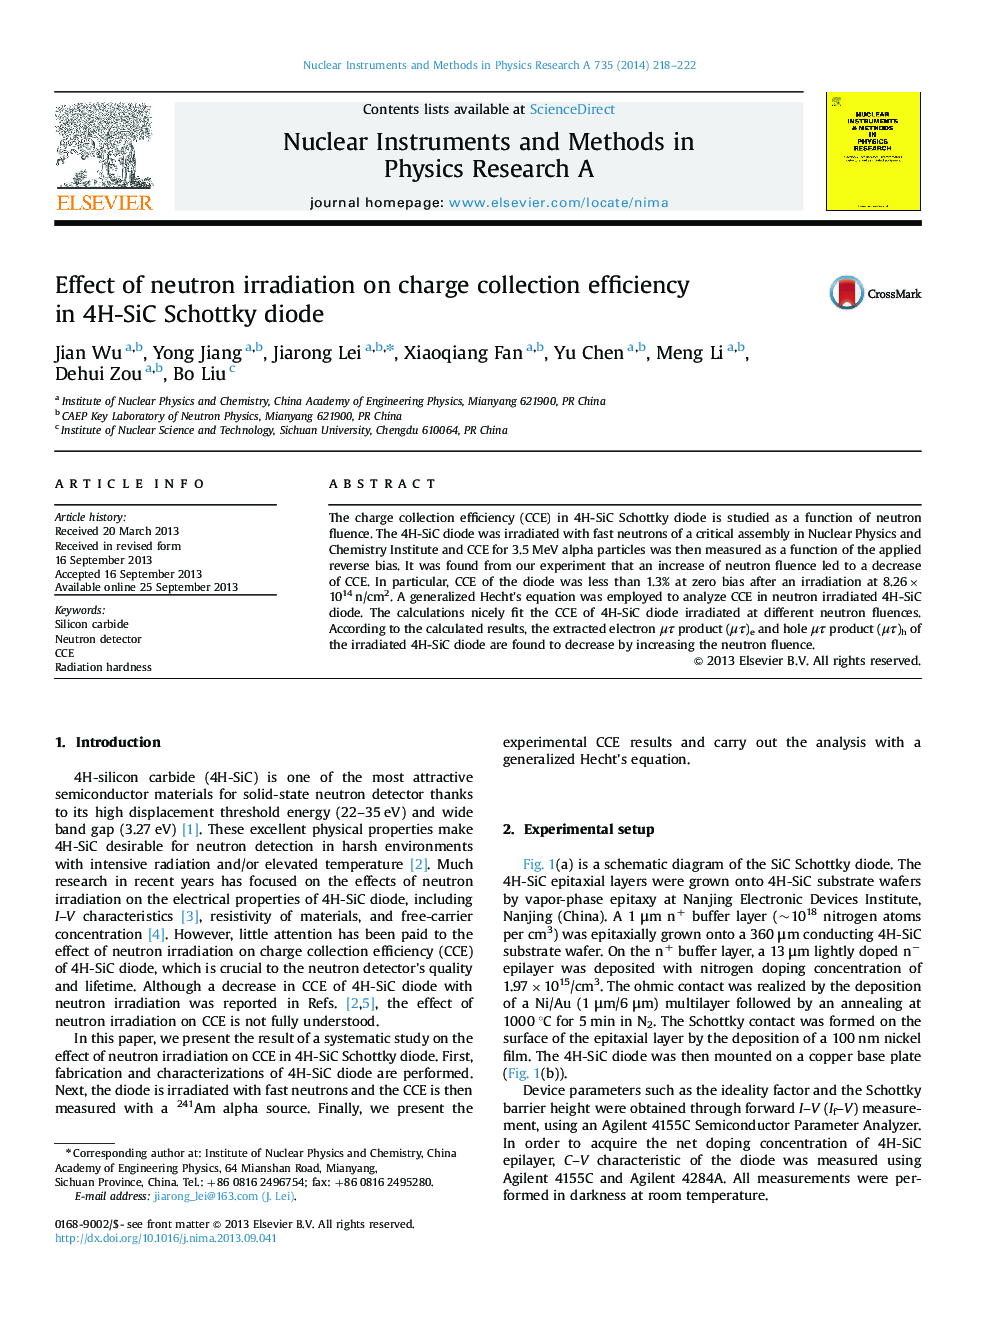 Effect of neutron irradiation on charge collection efficiency in 4H-SiC Schottky diode